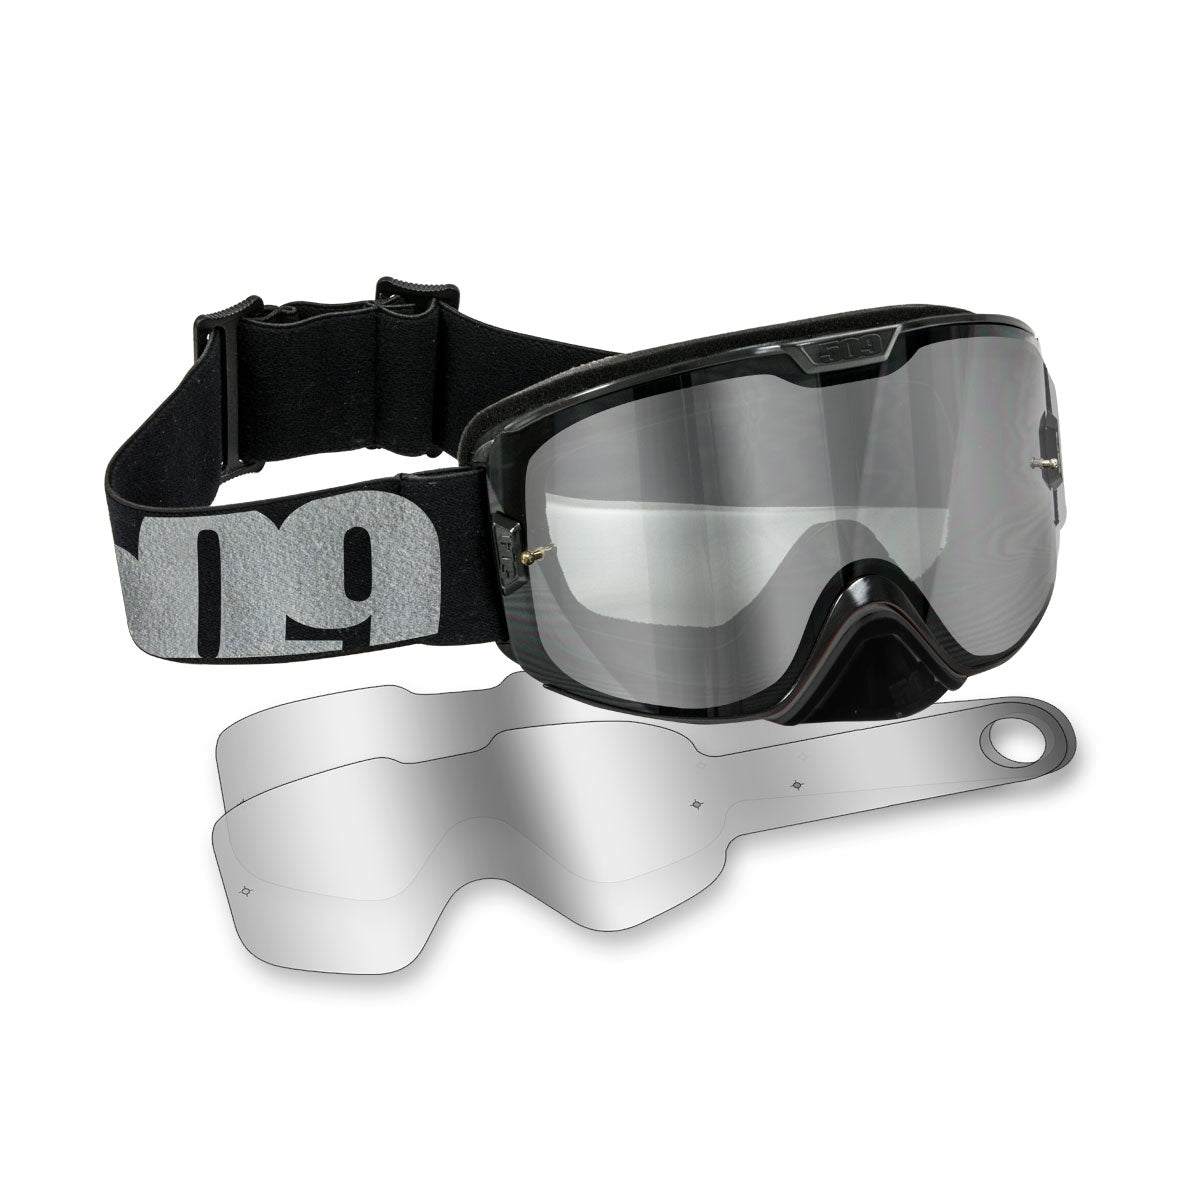 Laminated Tear Off Refills for Kingpin Goggles